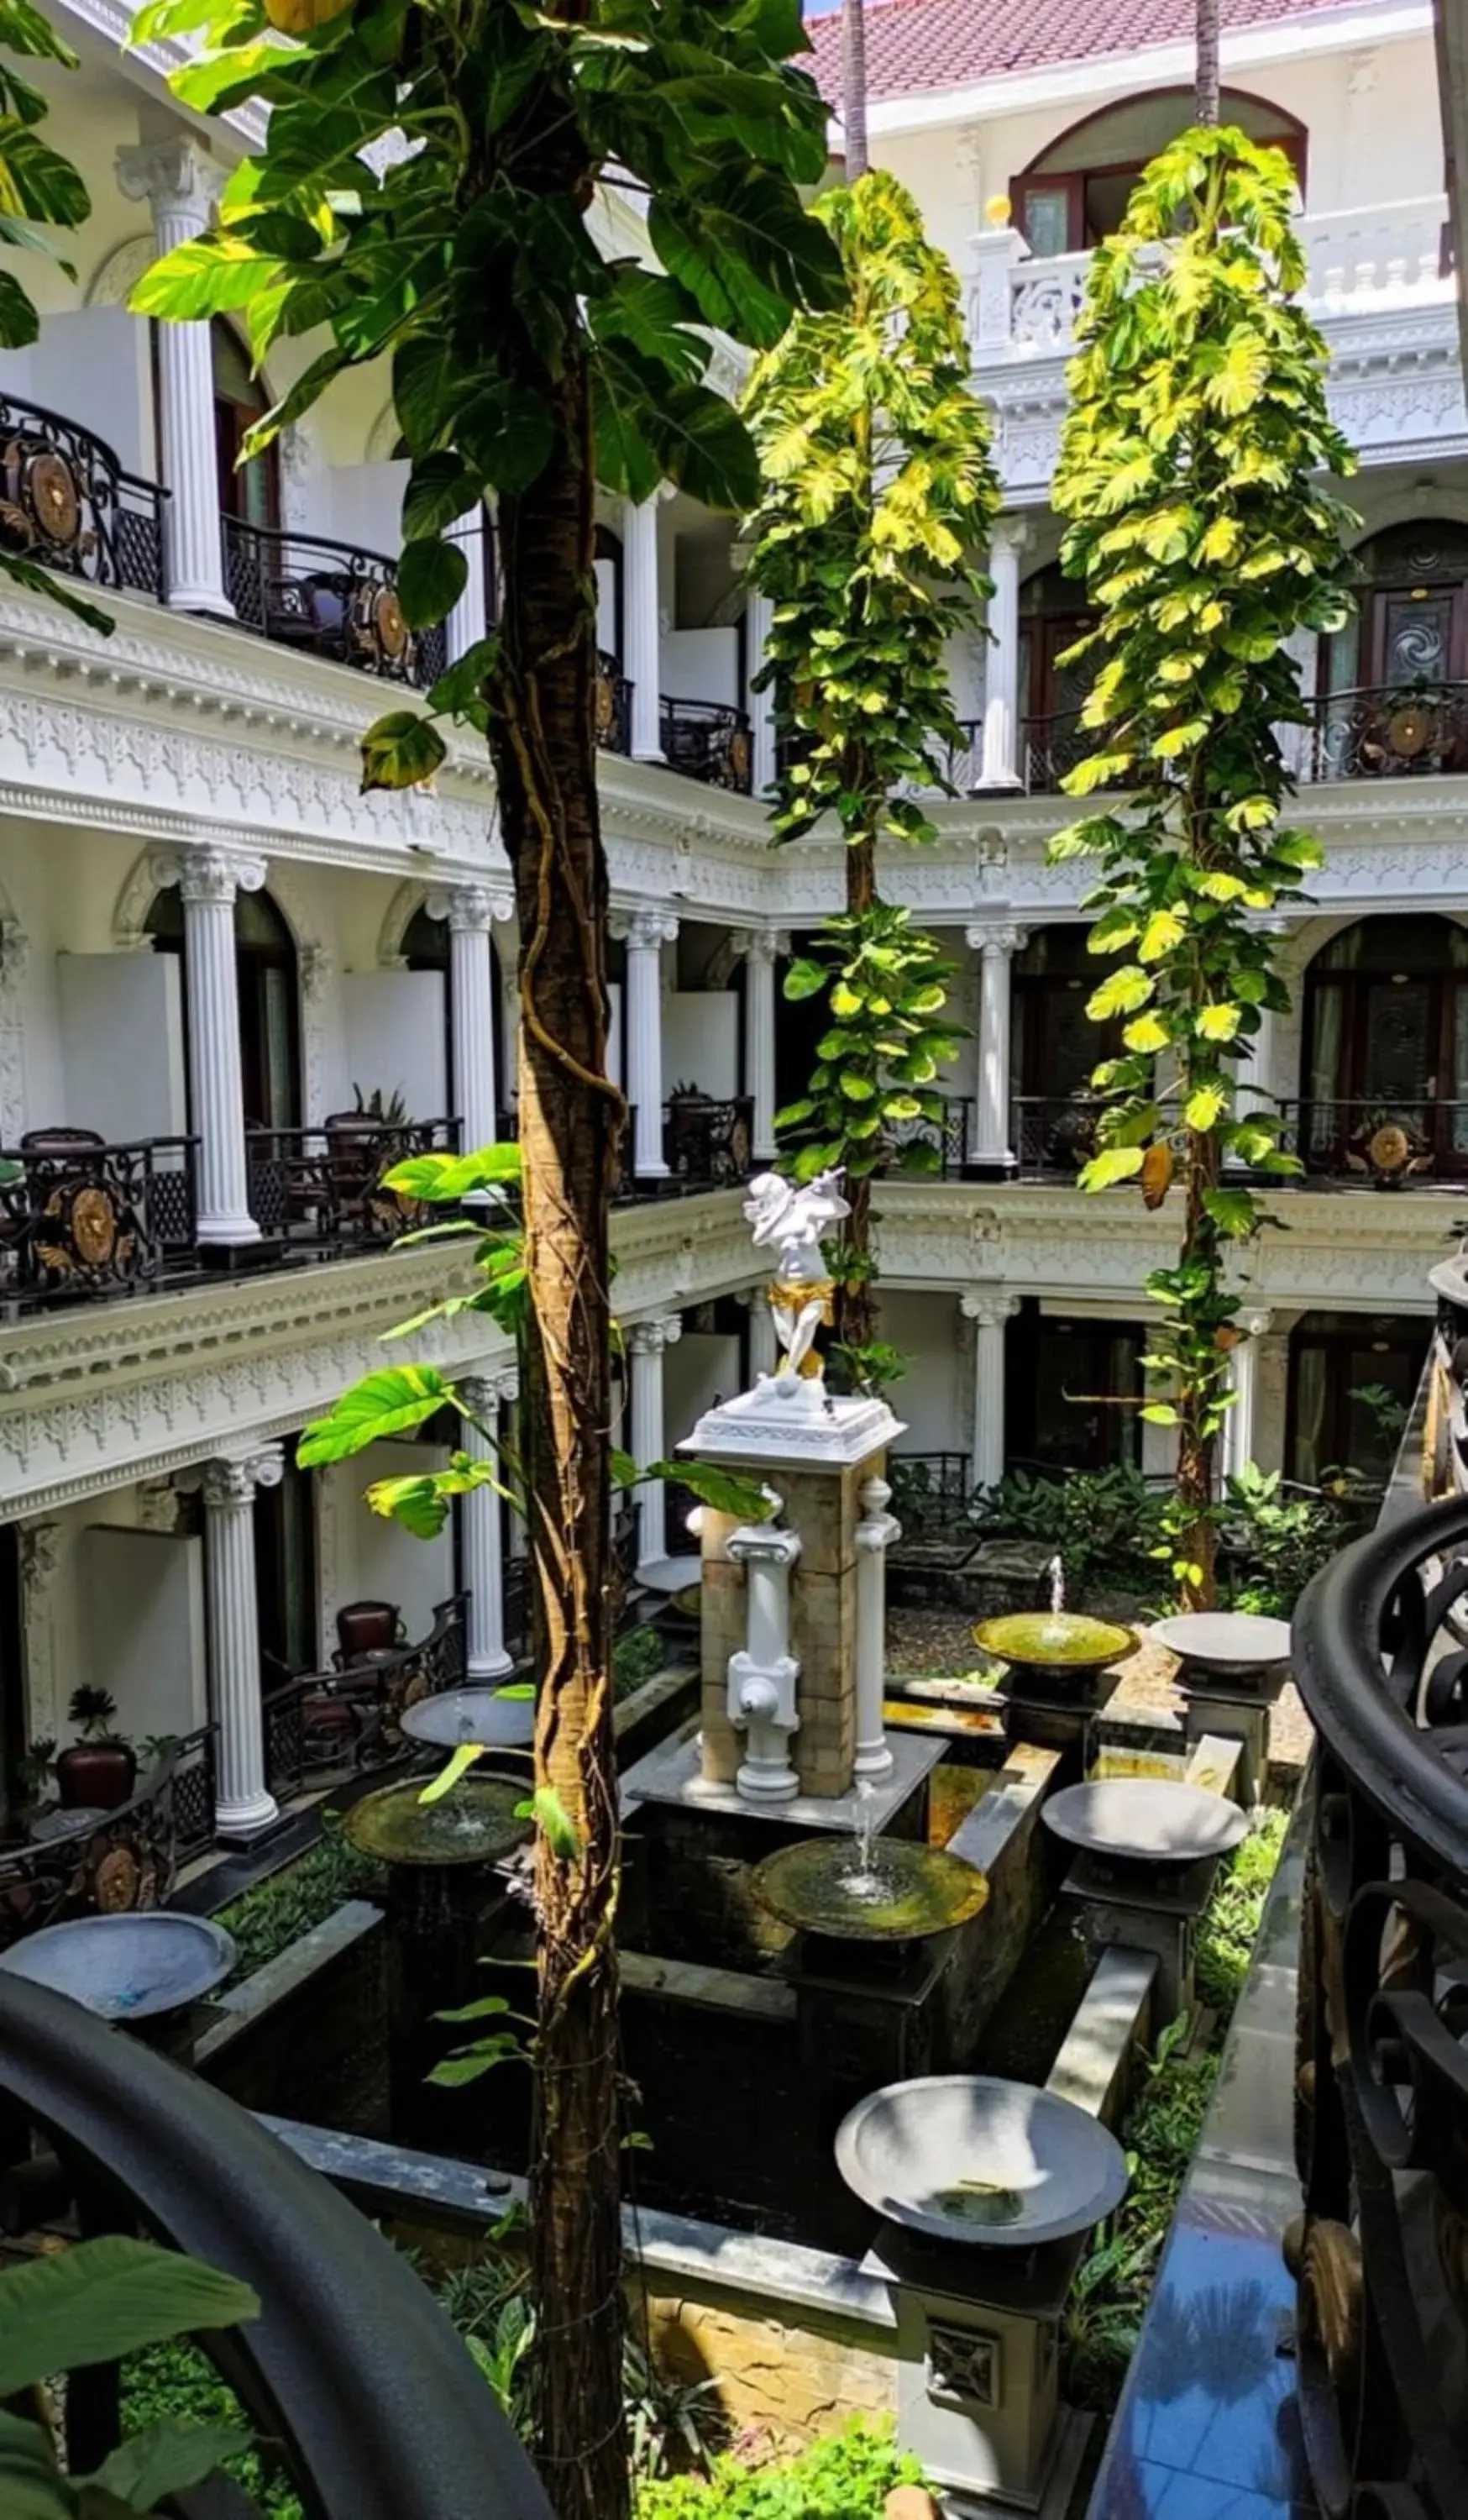 Garden view in The Grand Palace Hotel Malang